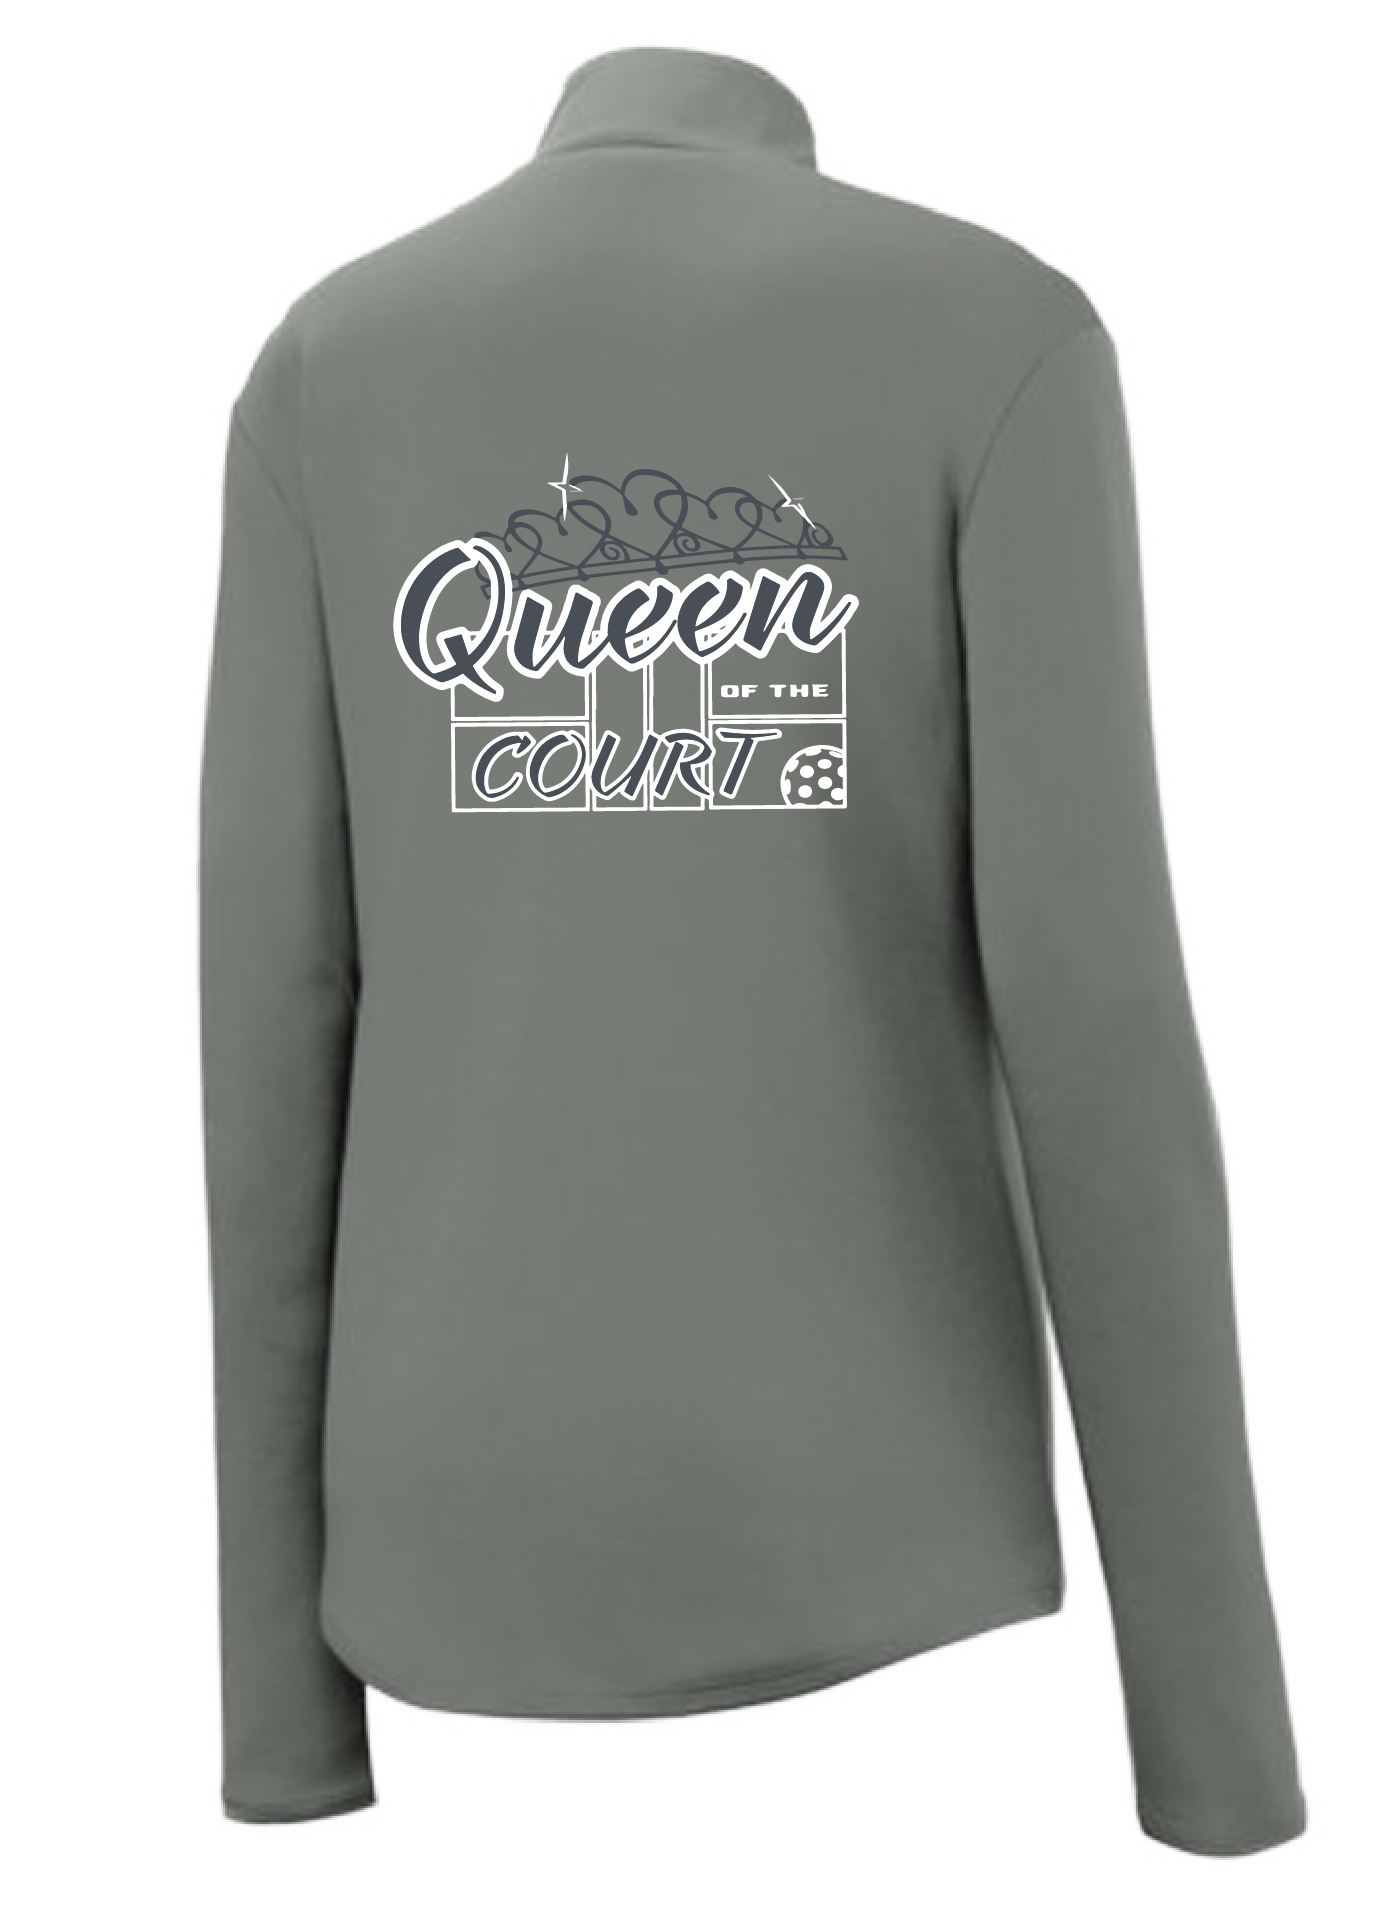 Pickleball Design: Queen of the Court  Women's 1/4-Zip Pullover:  Princess seams and drop tail hem.  Turn up the volume in this Women's shirt with its perfect mix of softness and attitude. Material is ultra-comfortable with moisture wicking properties and tri-blend softness. PosiCharge technology locks in color. Highly breathable and lightweight. Versatile enough for wearing year-round.